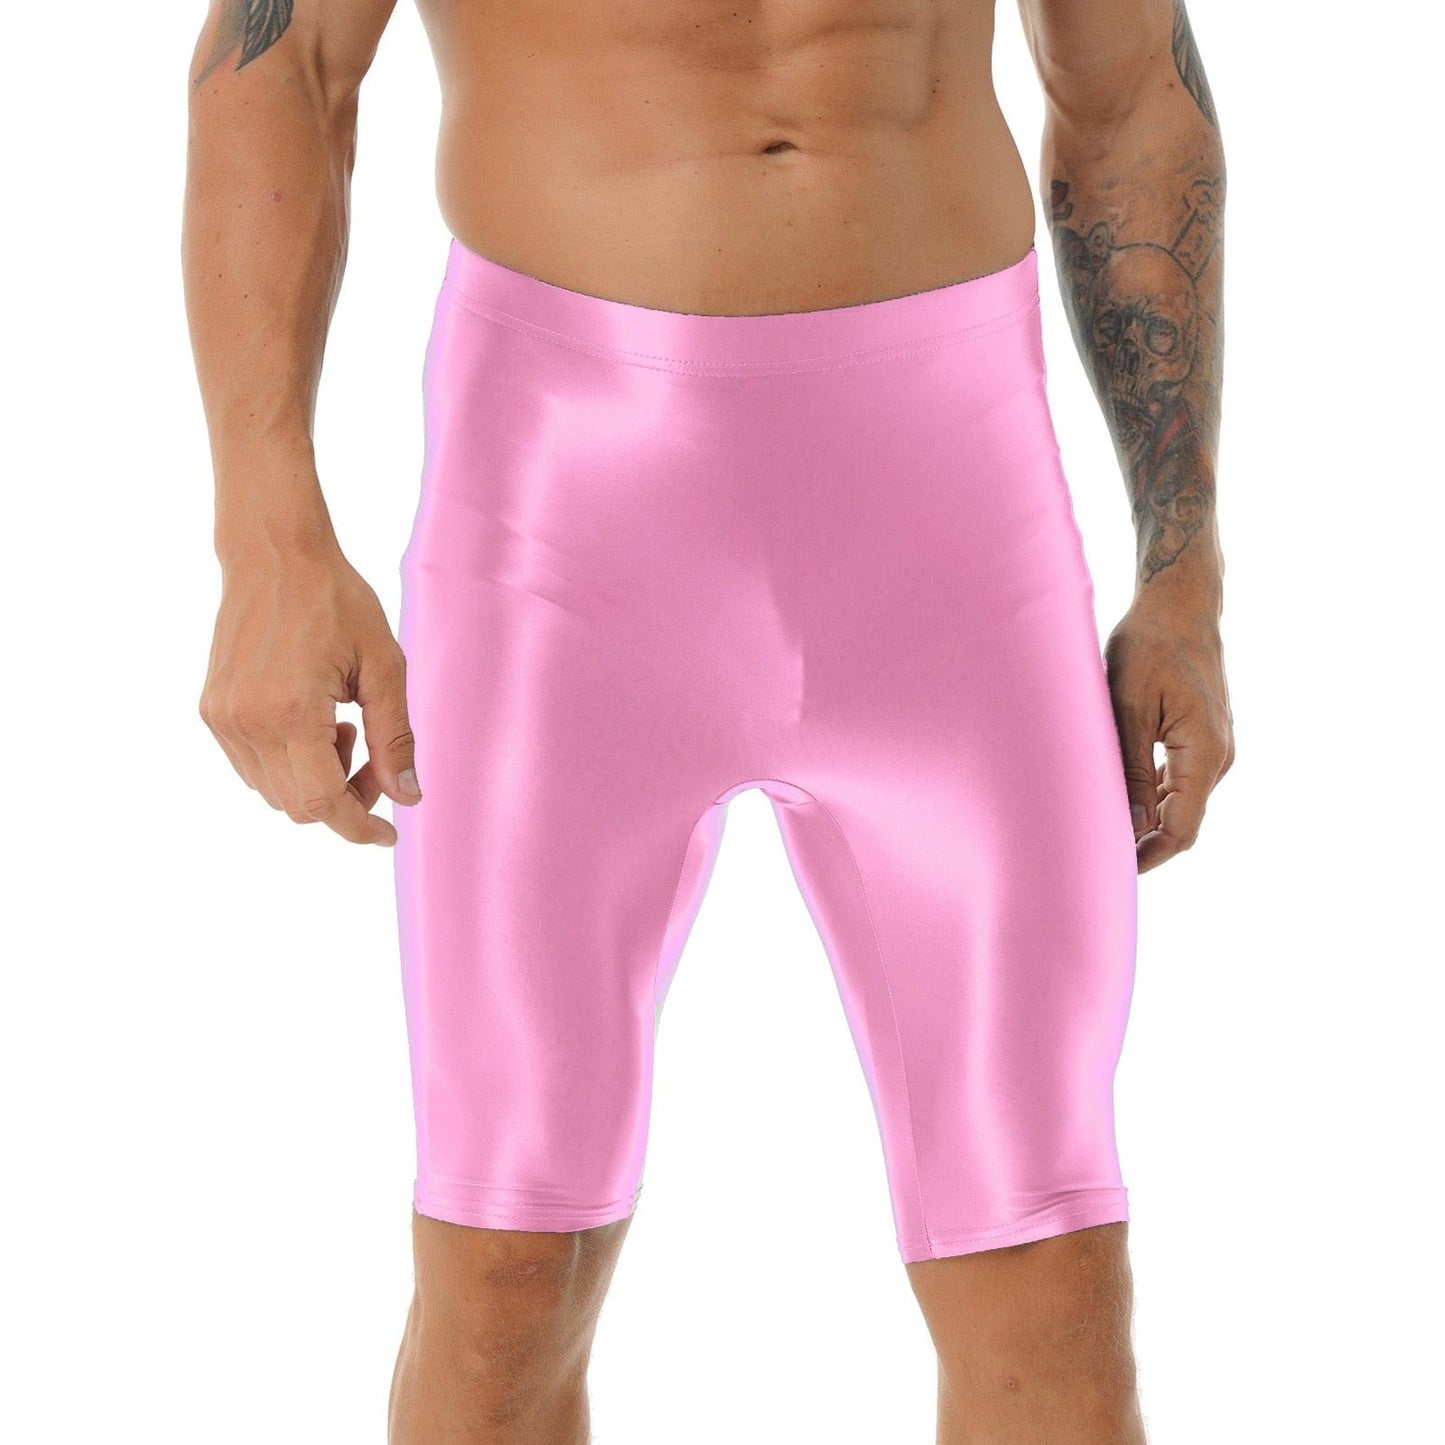 Kinky Cloth Pink / M / 1pc Mens Glossy Swimsuit Shorts